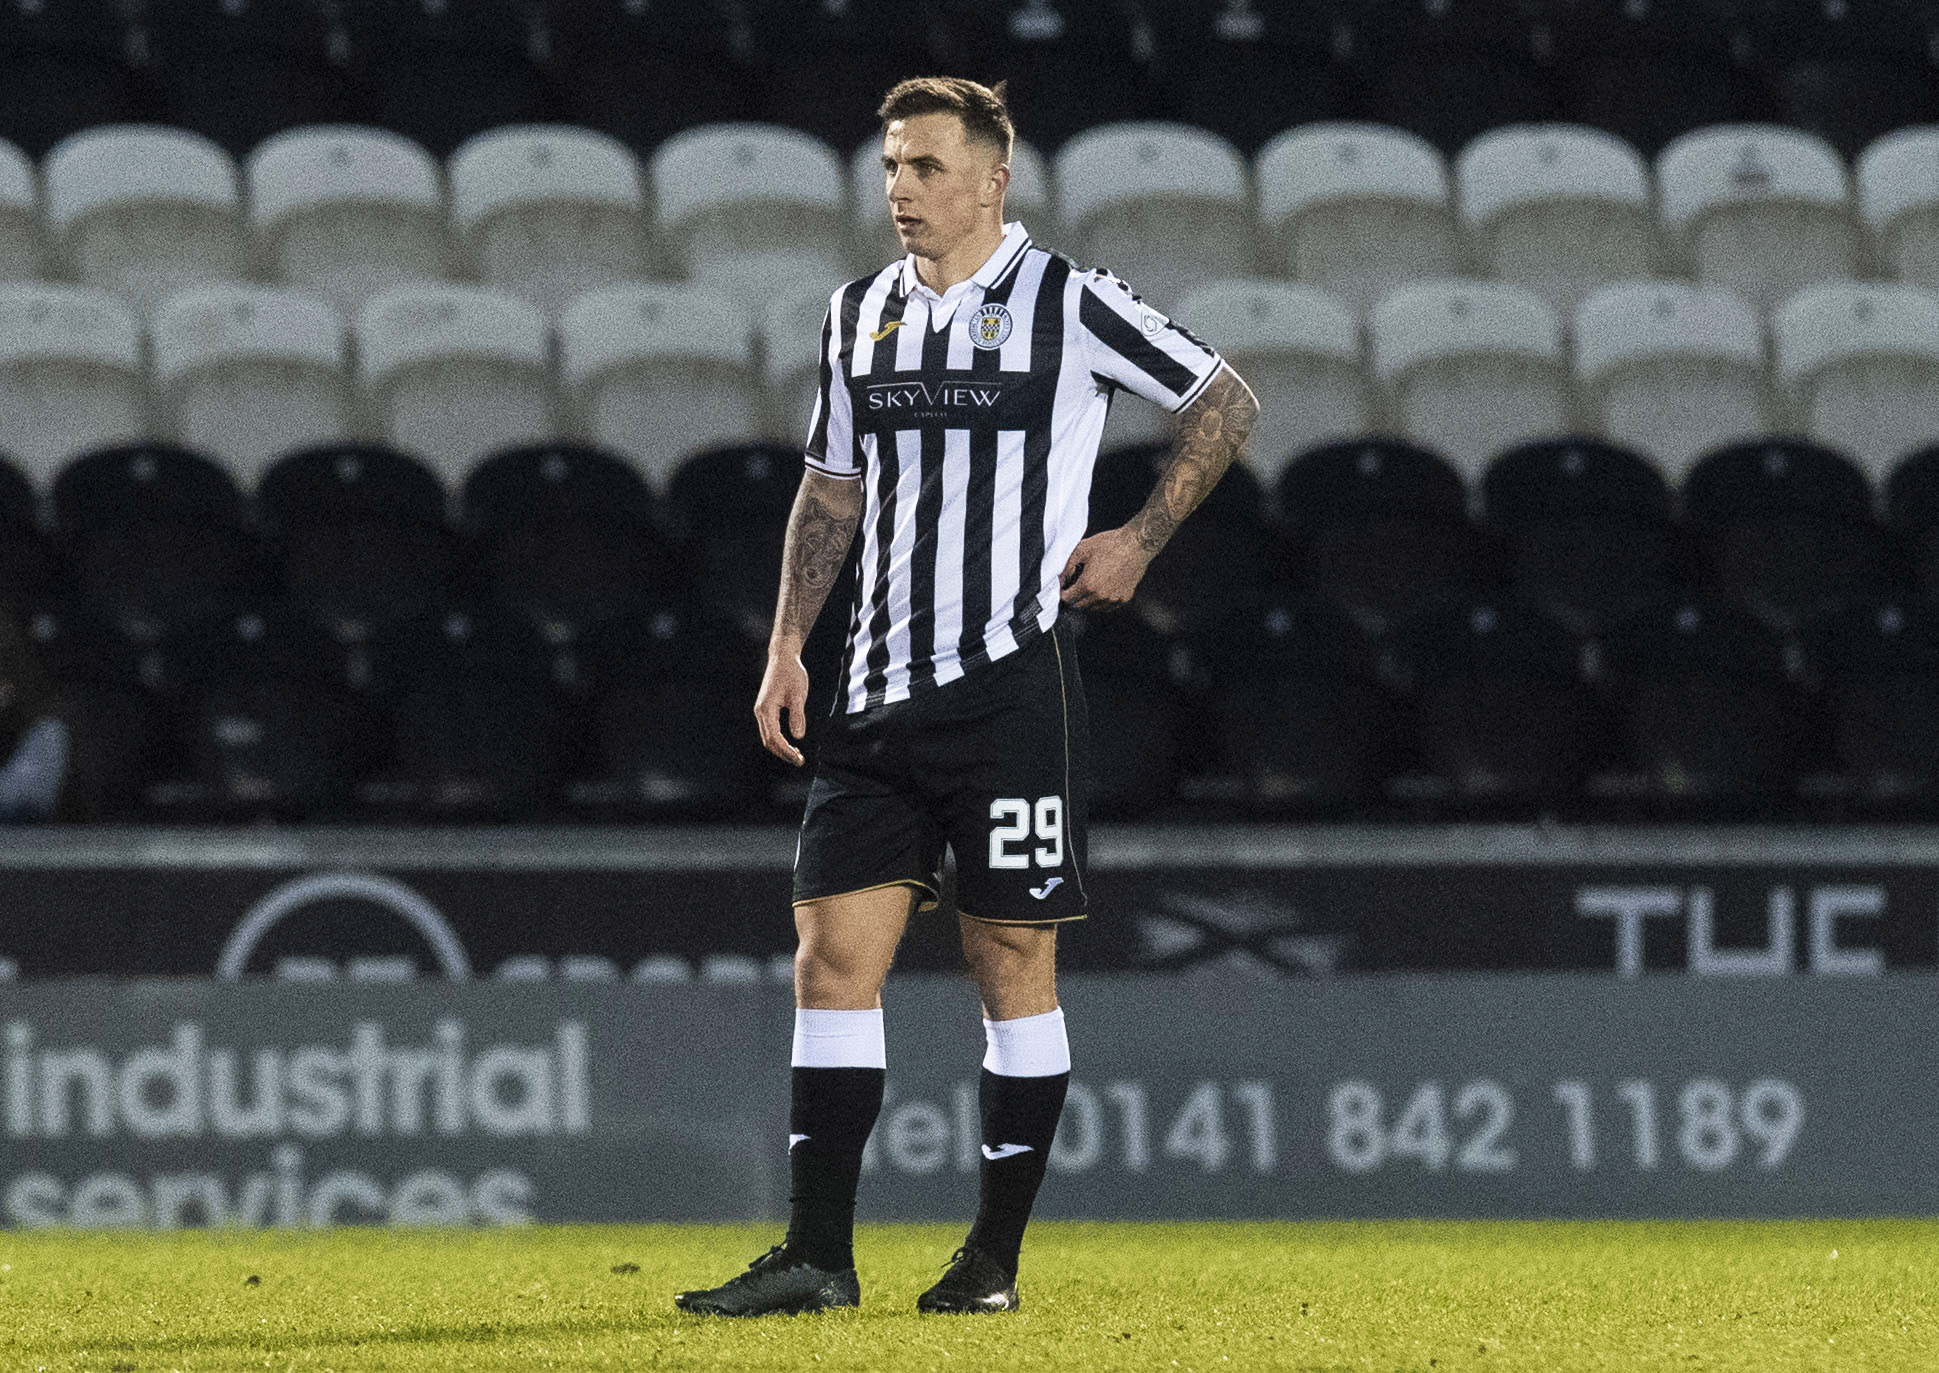 Eamonn Brophy dreaming of Euro 2020 call-up after sealing St Mirren move